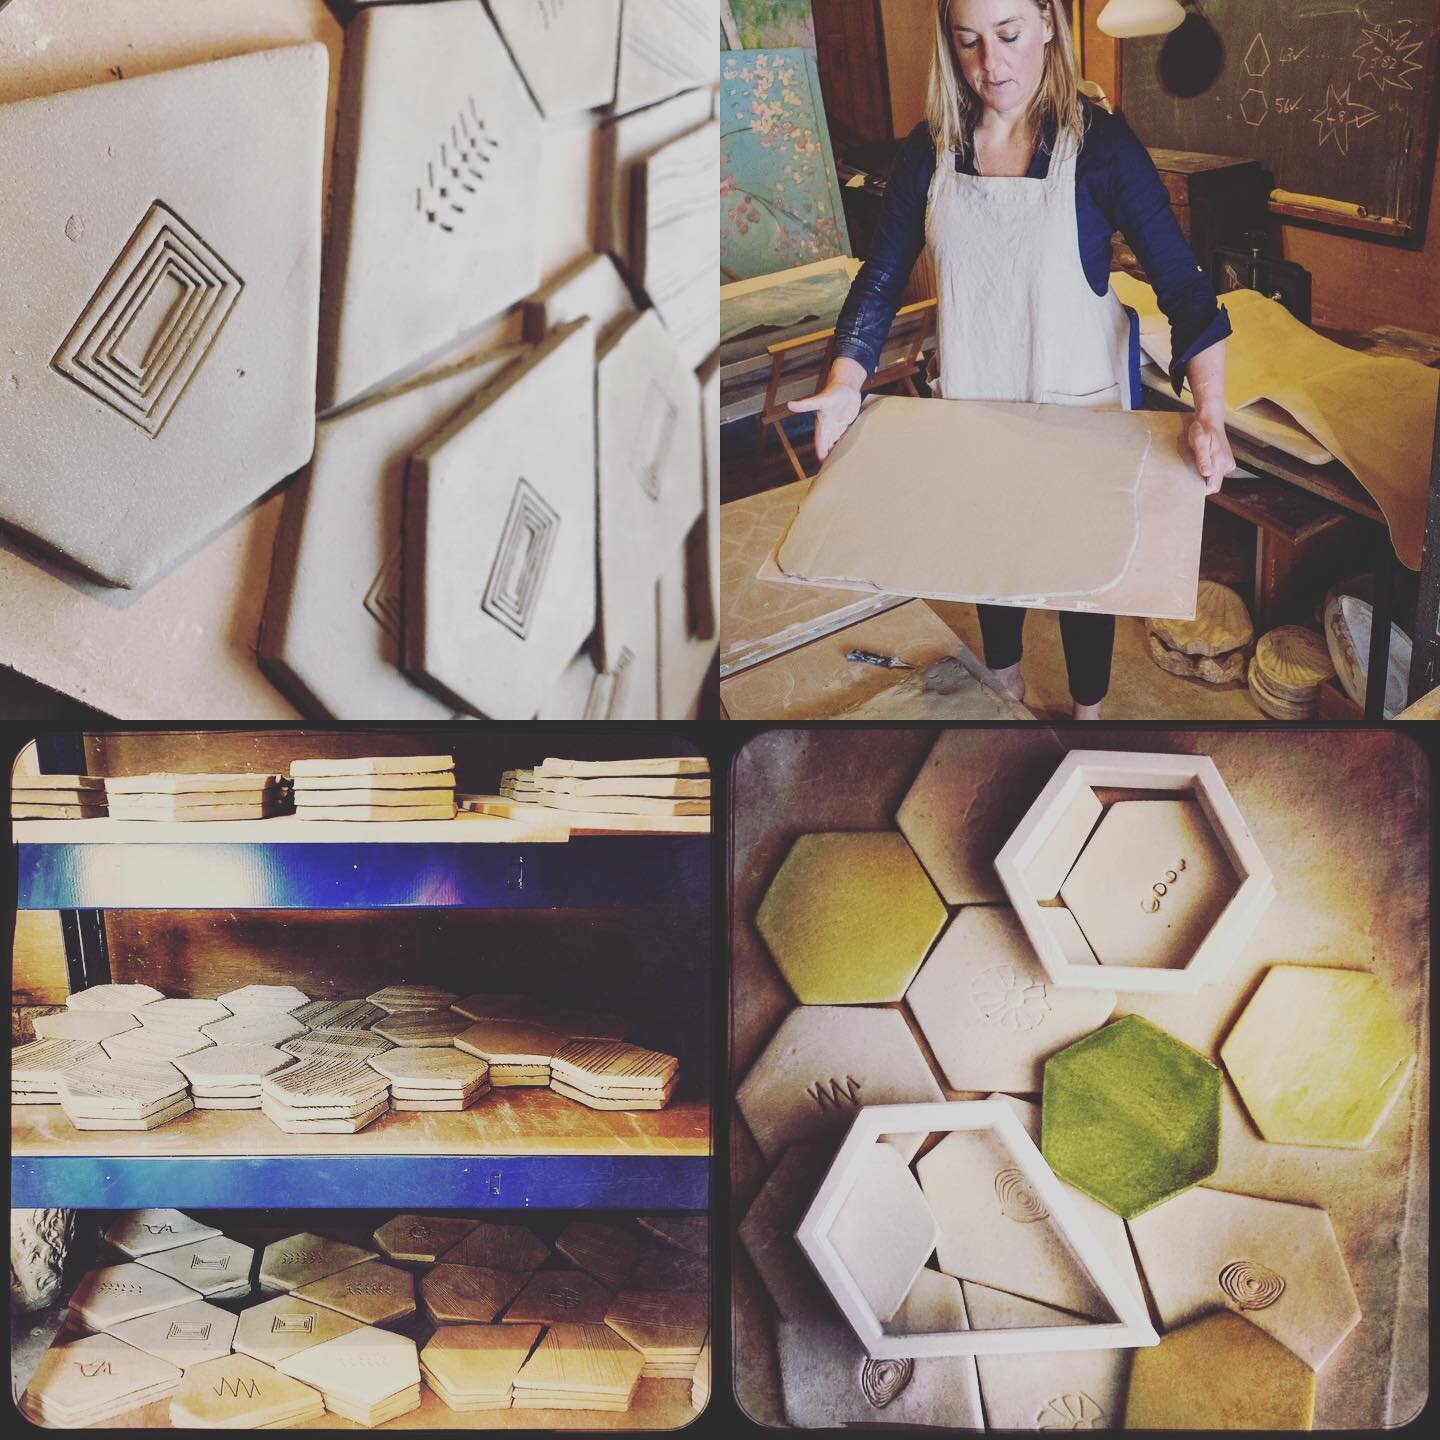 Over the last month I&rsquo;ve been busy making a lot of handmade tiles with bespoke tile shapes for Artist/Designer Lindsay Perth&rsquo;s Public Art Commission for #DesignintheDale at #LeverndaleHospital. Perth's Commission is designing art interven